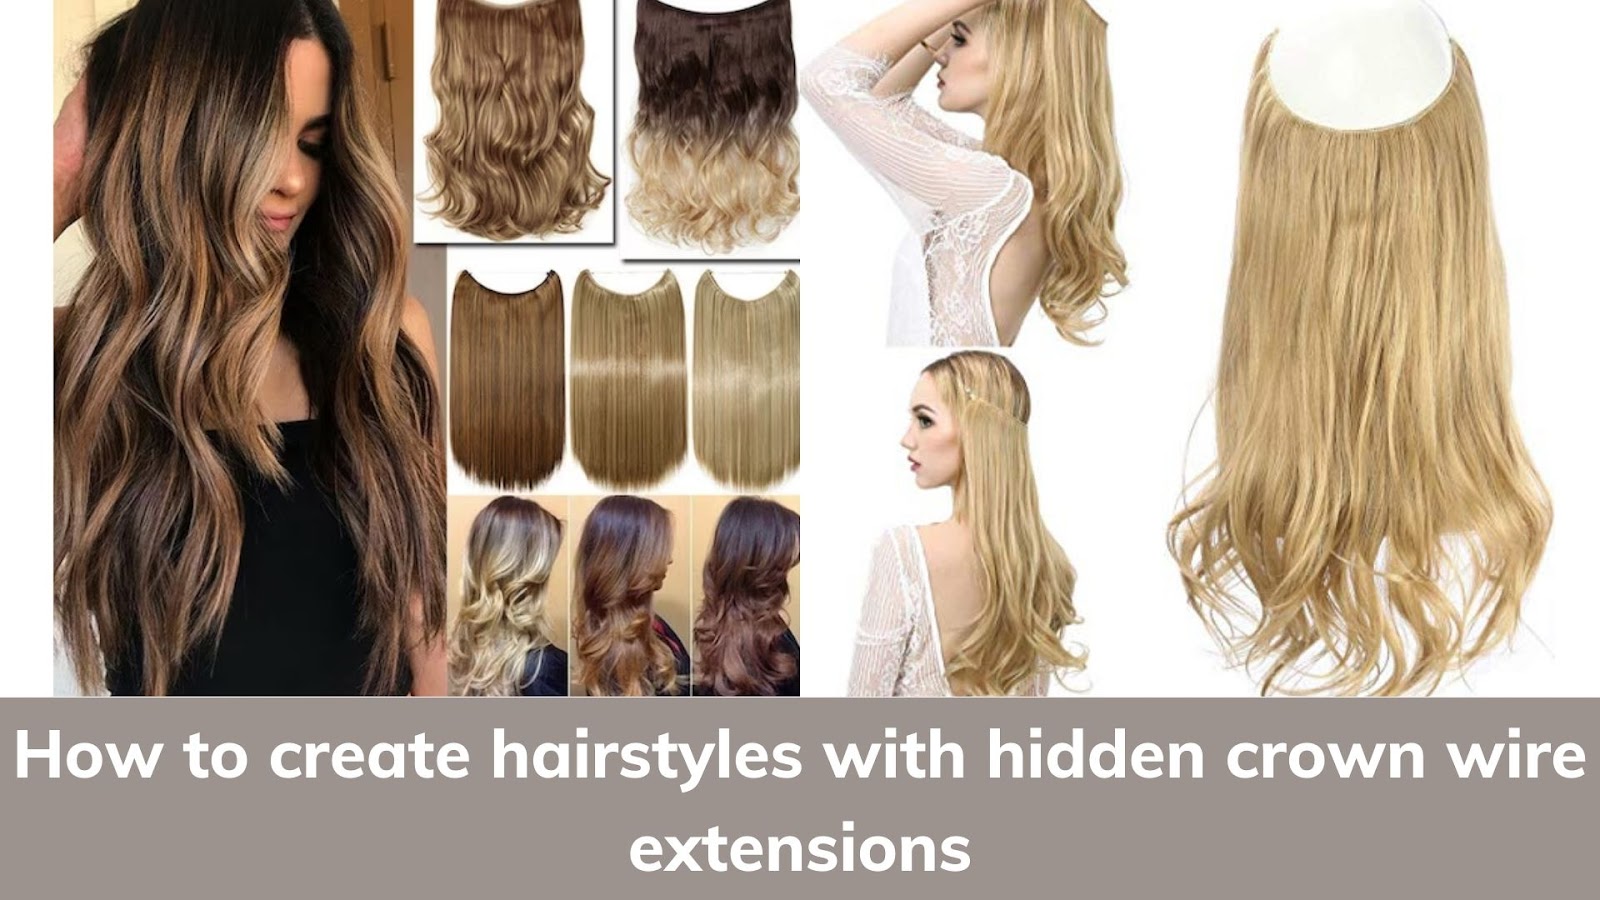 How to create hairstyles with hidden crown wire extensions